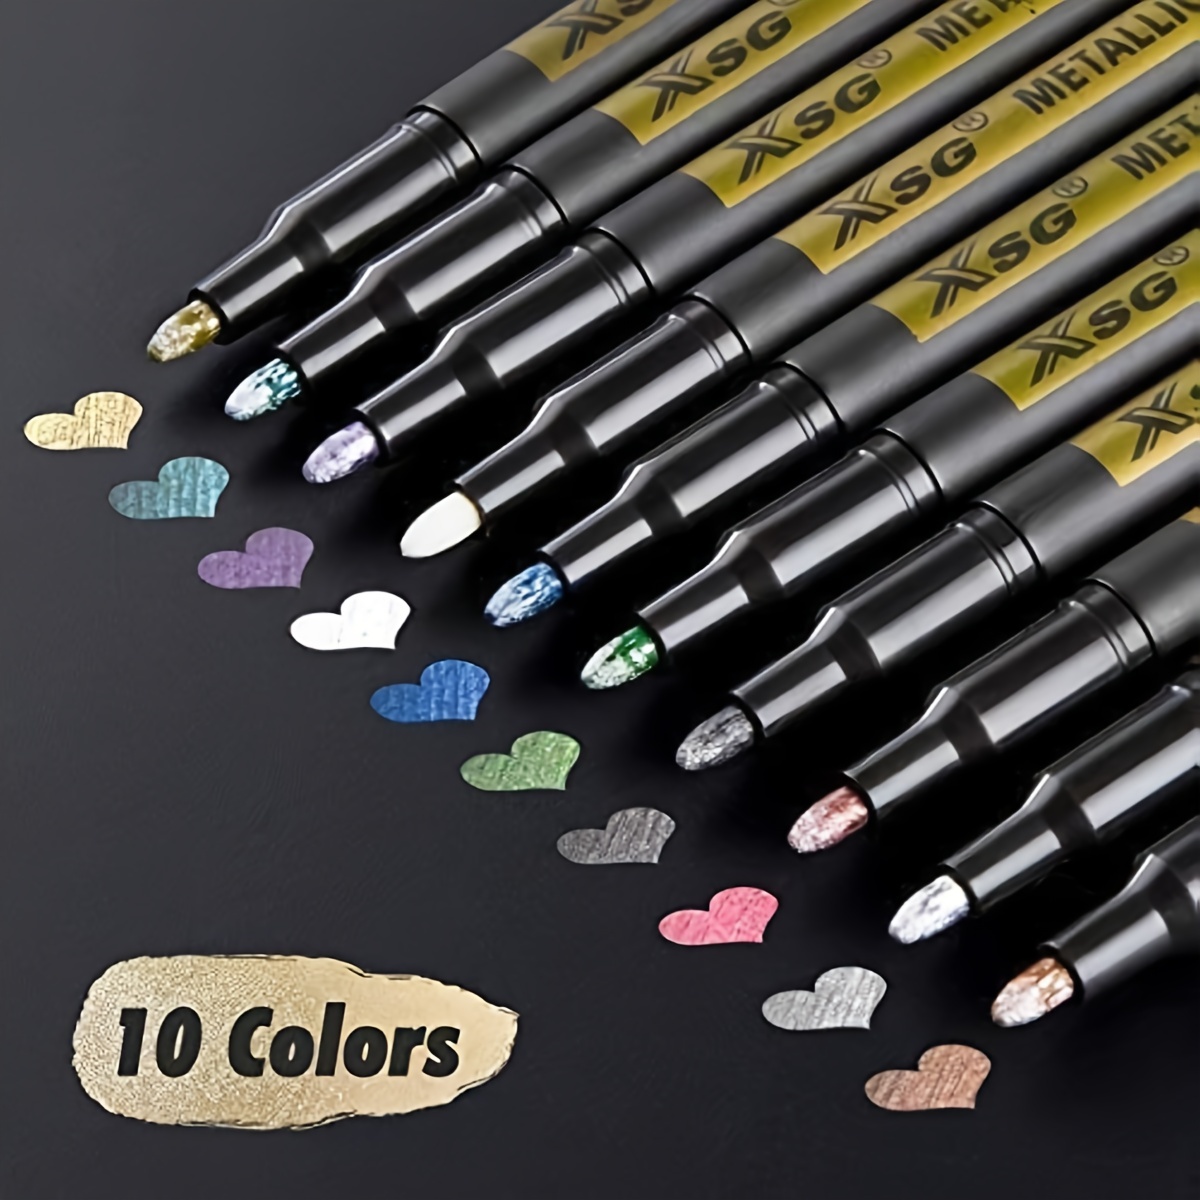 Dyvicl Metallic Marker Pens - 15 Colors Hard Fine Tip Metallic Markers for  Black Paper, Adult Coloring, Card Making, Rock Painting, Scrapbooking